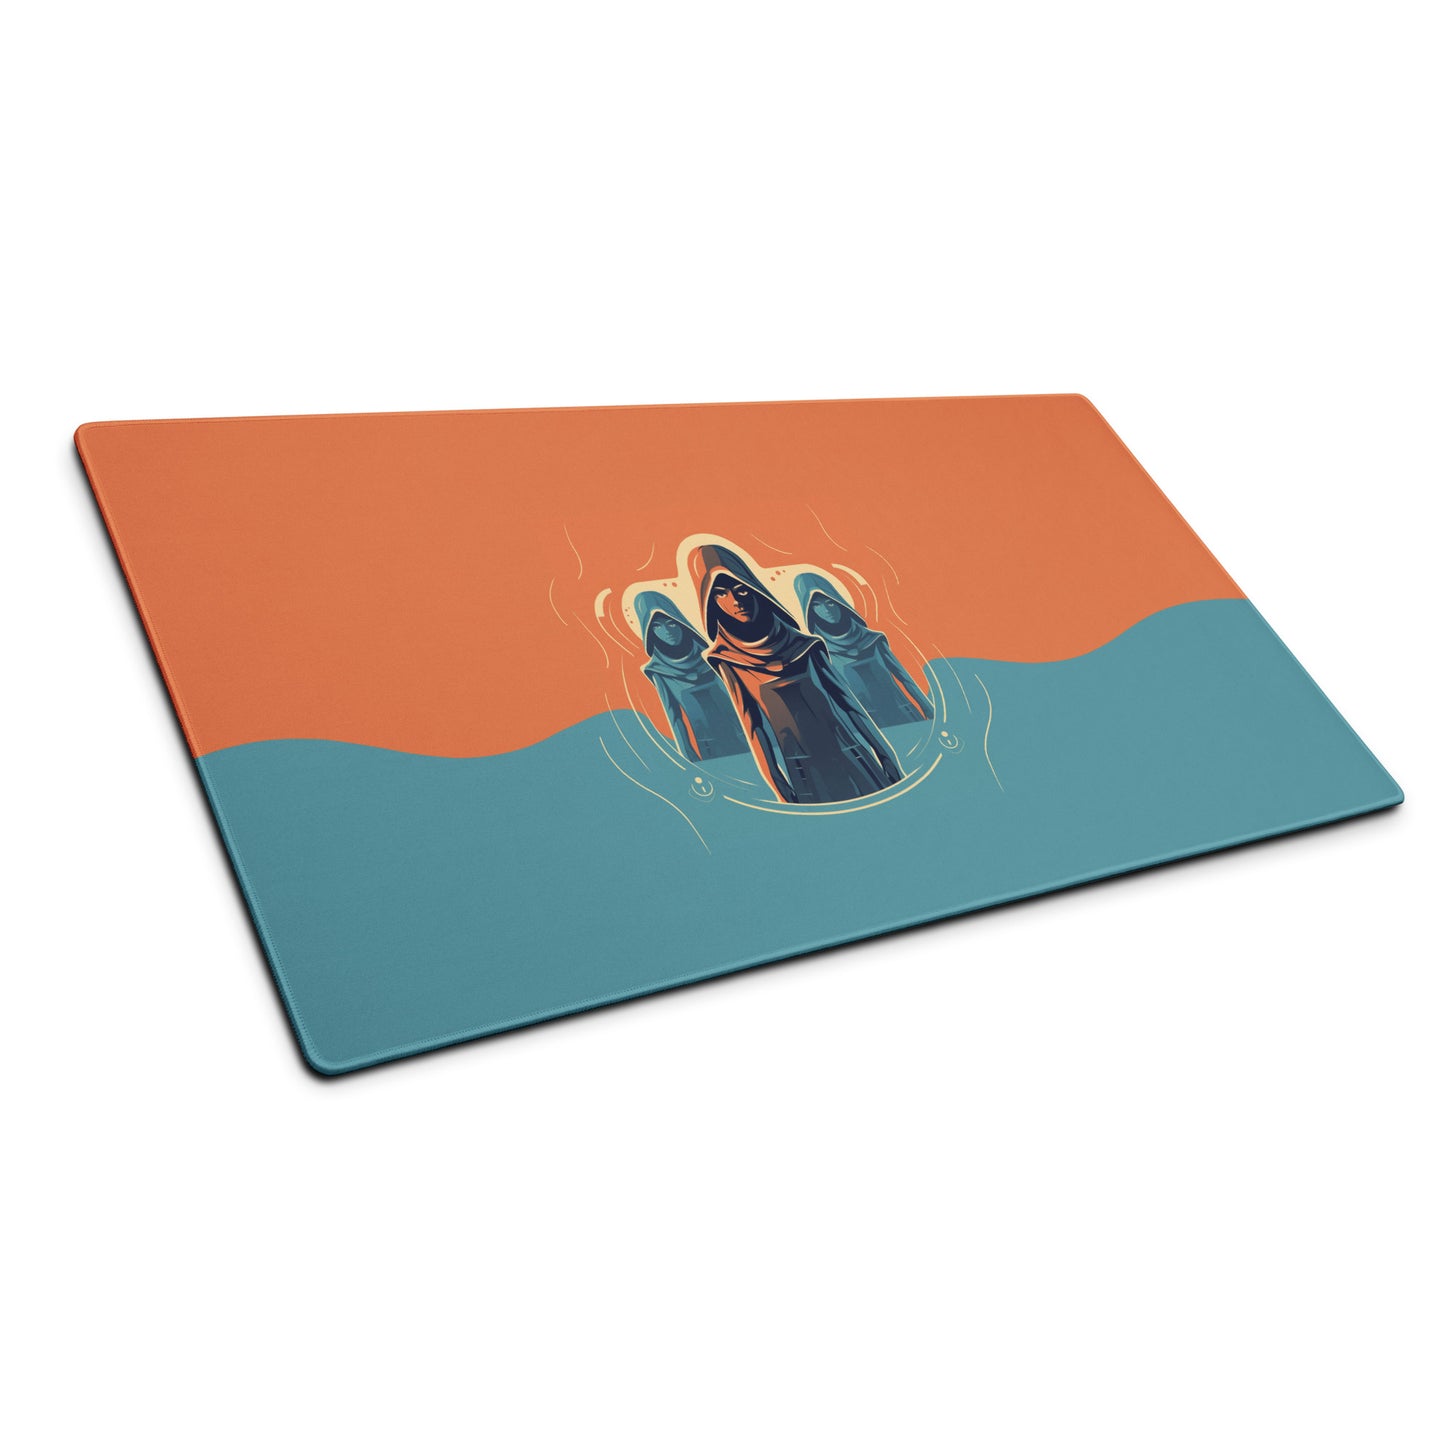 A 36" x 18" orange and blue desk pad with three robed figures sitting at an angle.